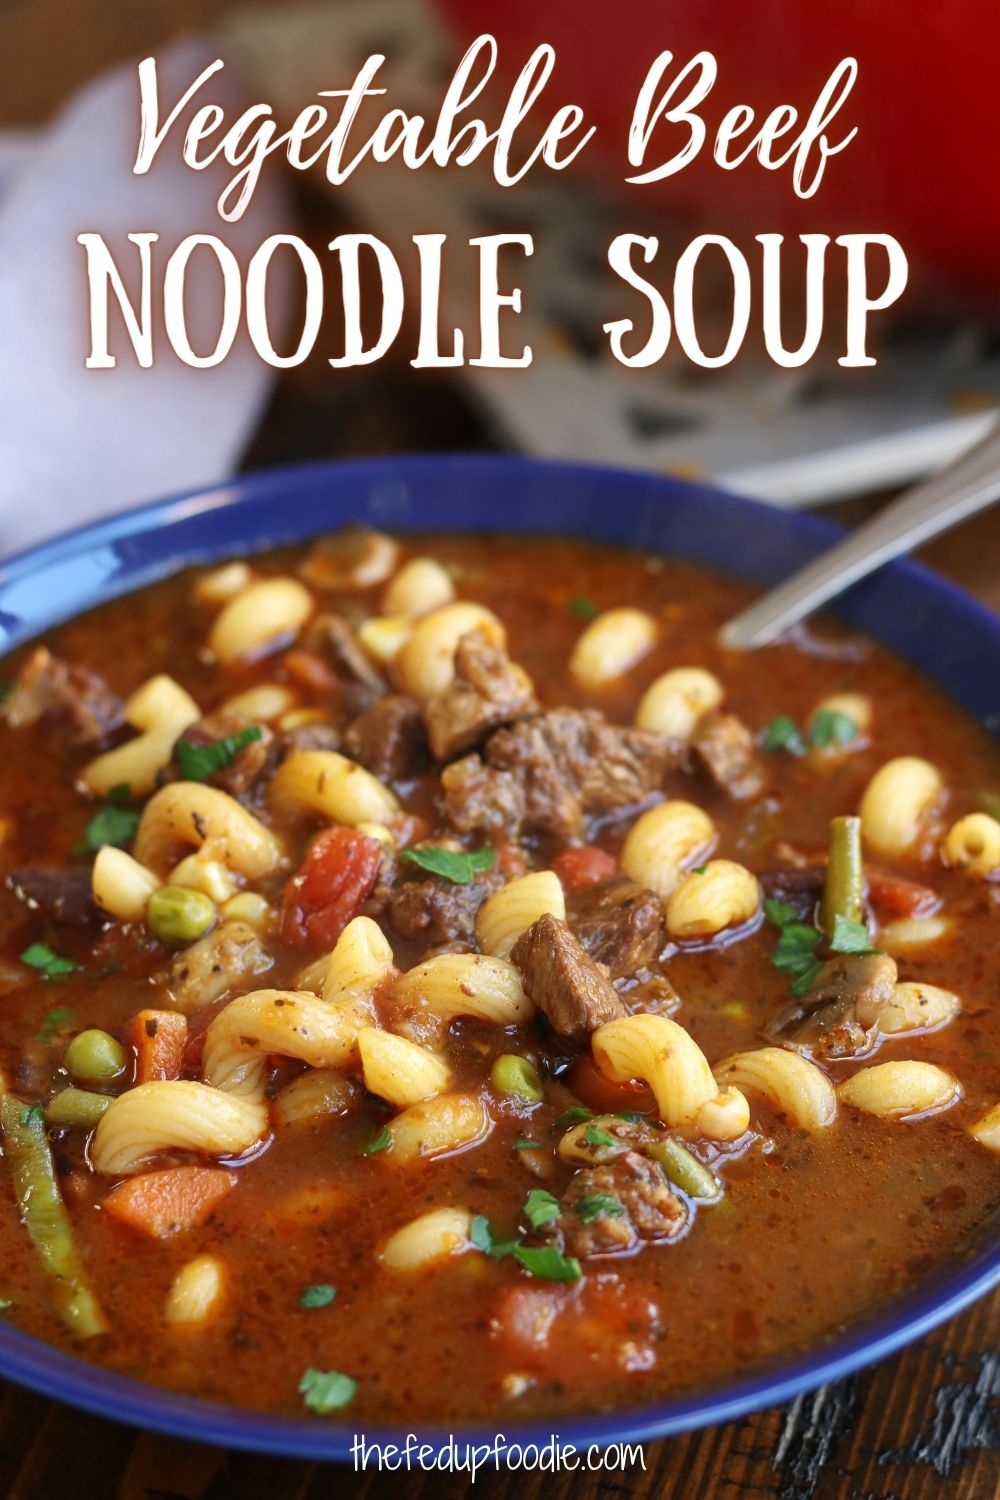 Homemade Beef Noodle Soup with tender chunks of beef, tomatoes and red wine in a rich and savory broth. This easy soup recipe is the best heart warming cozy winter meal. Stovetop, Instant Pot and slow cooker instructions included.
#BeefNoodleSoup #BeefNoodlesRecipes #BeefNoodlesSoupWithTomatoes #BeefNoodlesSoupWithStewMeat #NoodleSoupWithBeef #VegetableBeefNoodleSoupWithStewMeat #BeefBrothSoupRecipes #BeefSoupRecipesEasy